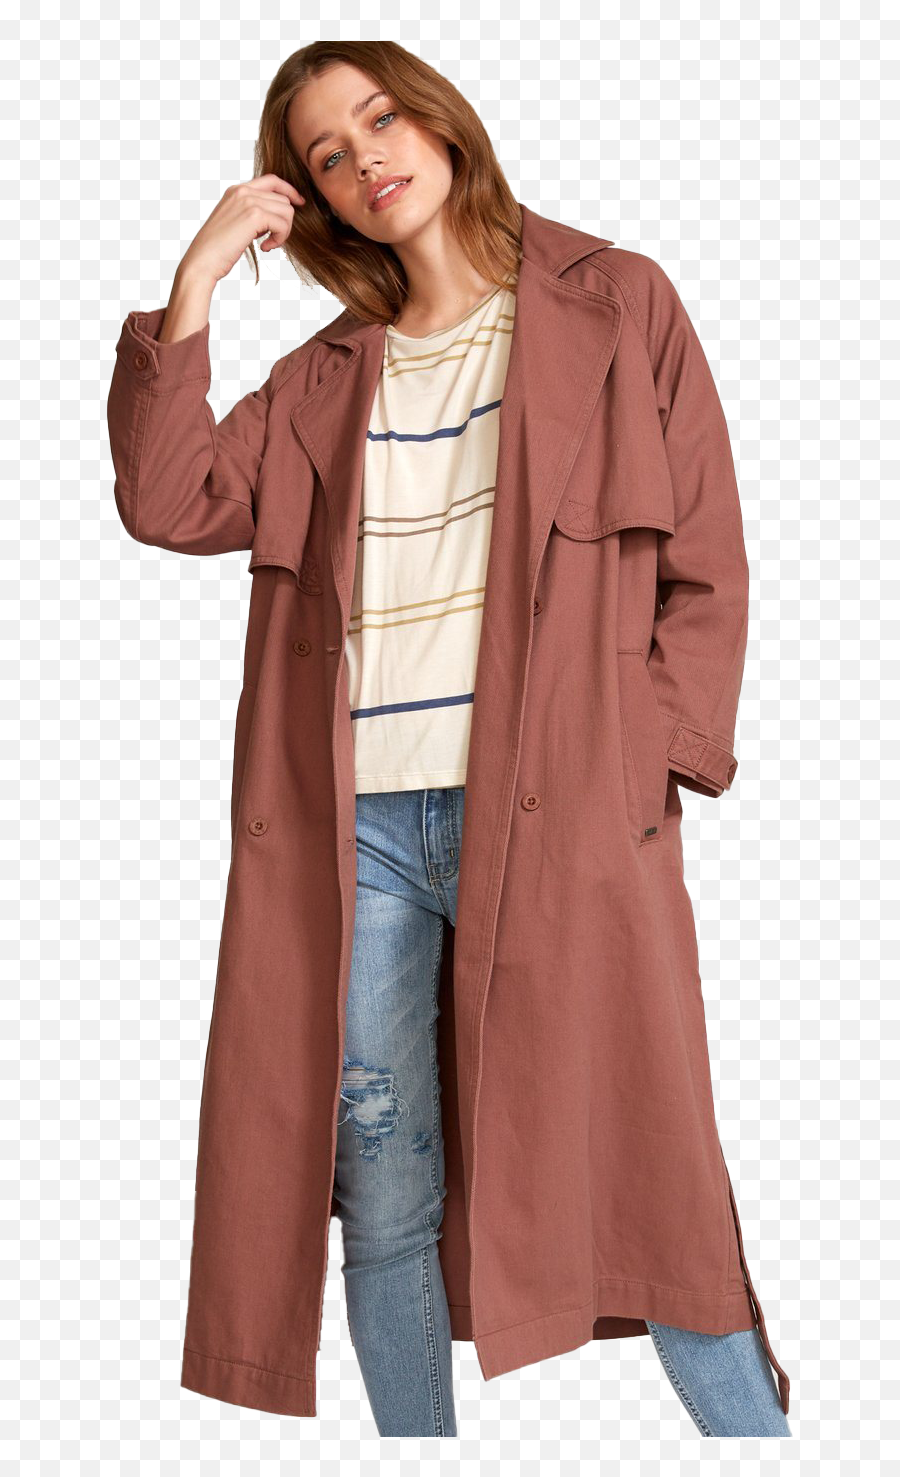 Download Trench Coat Png Image - Rvca Larson,Trench Coat Png